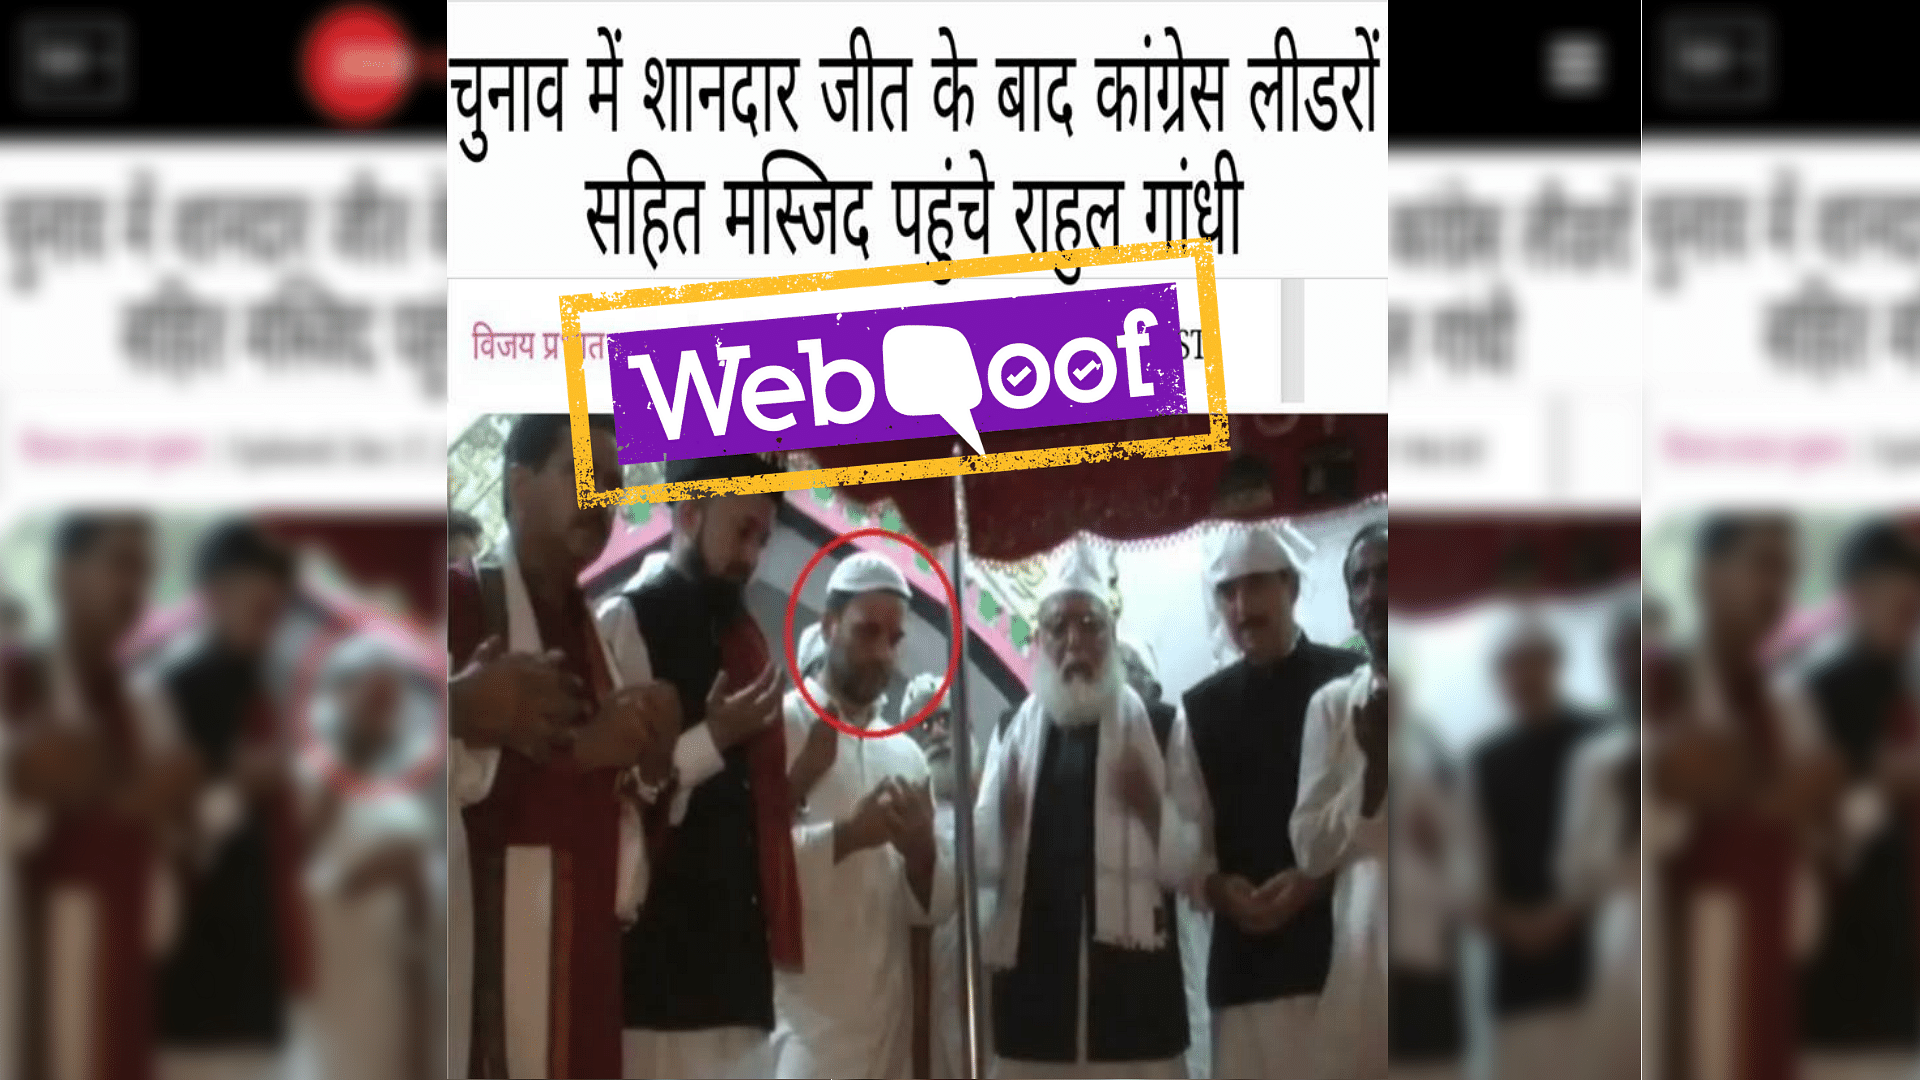 A viral image falsely claimed that Rahul Gandhi converted to Islam post Congress’ win.